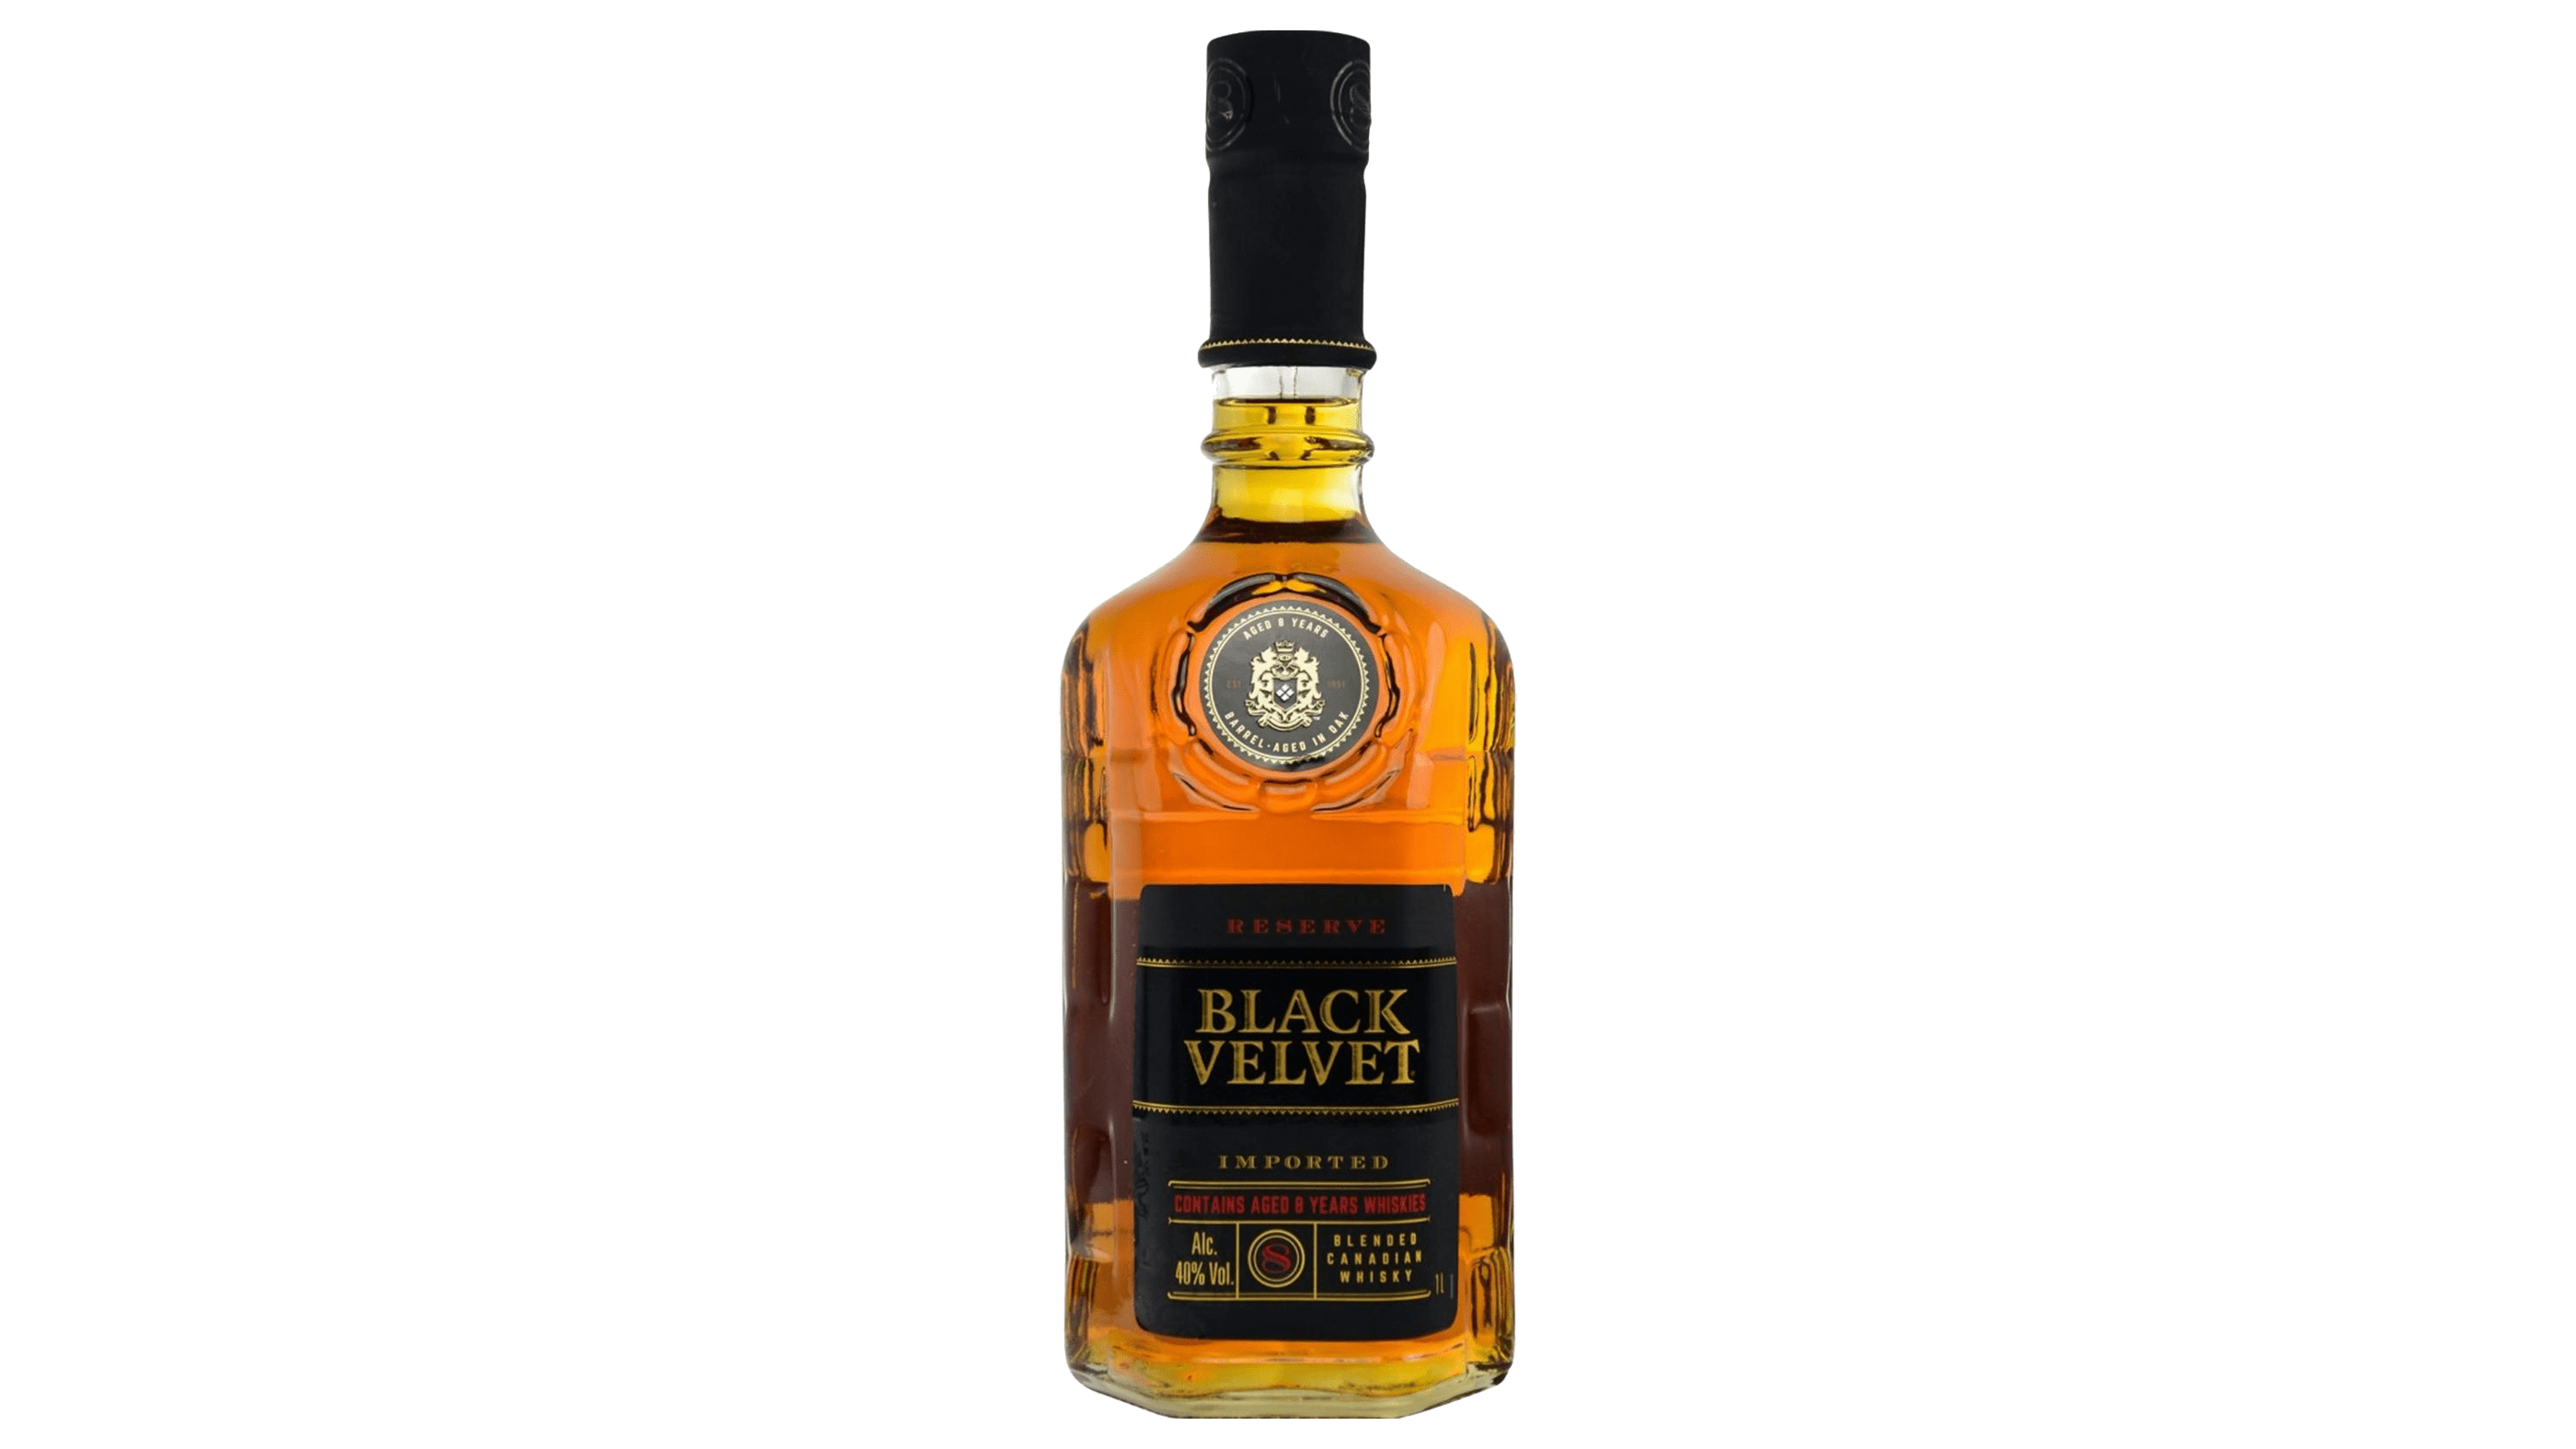 Popular Brands and Logos of Canadian Whiskey